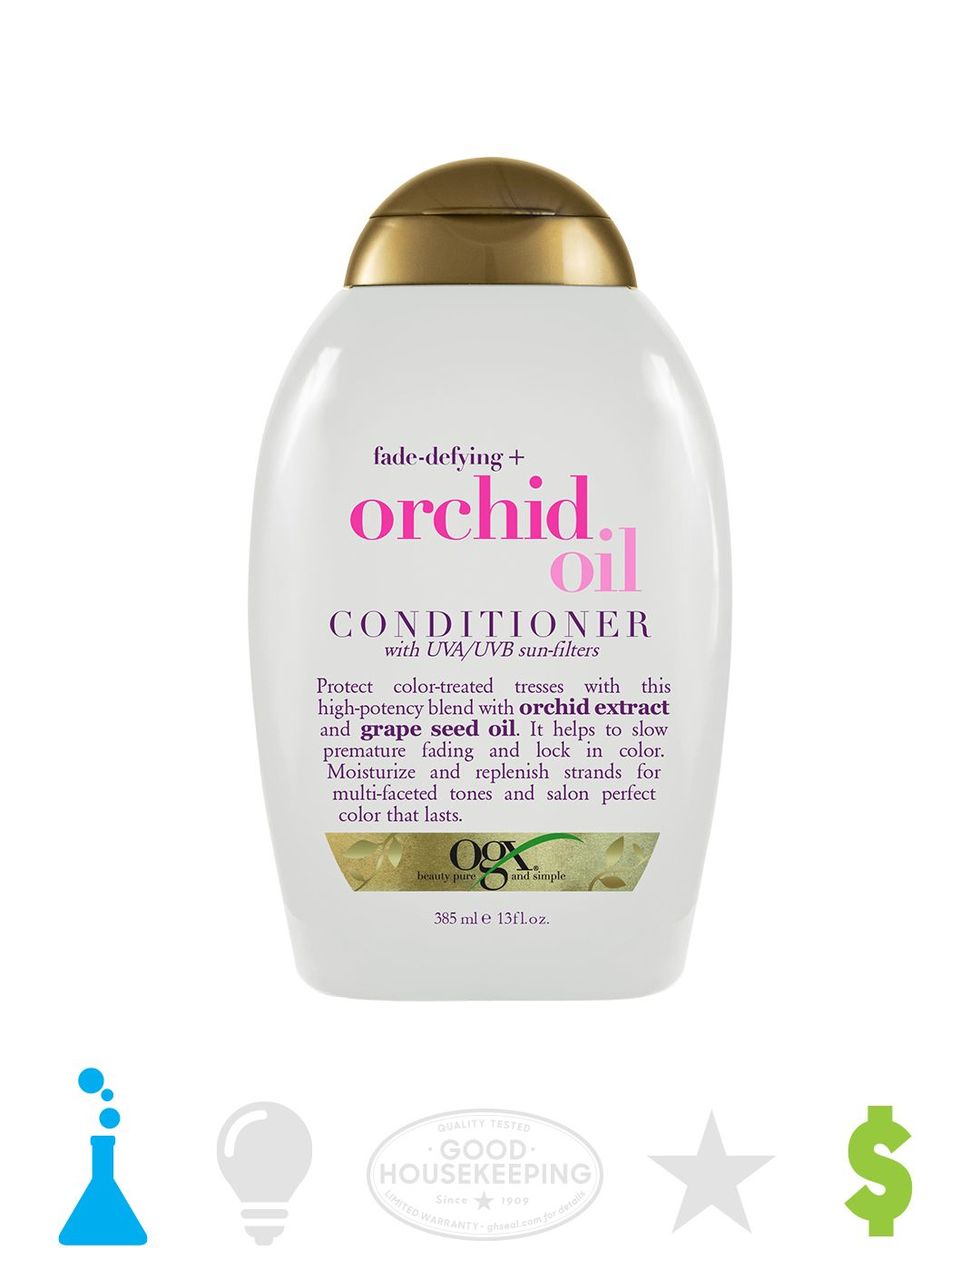 Fade-Defying + Orchid Oil Conditioner